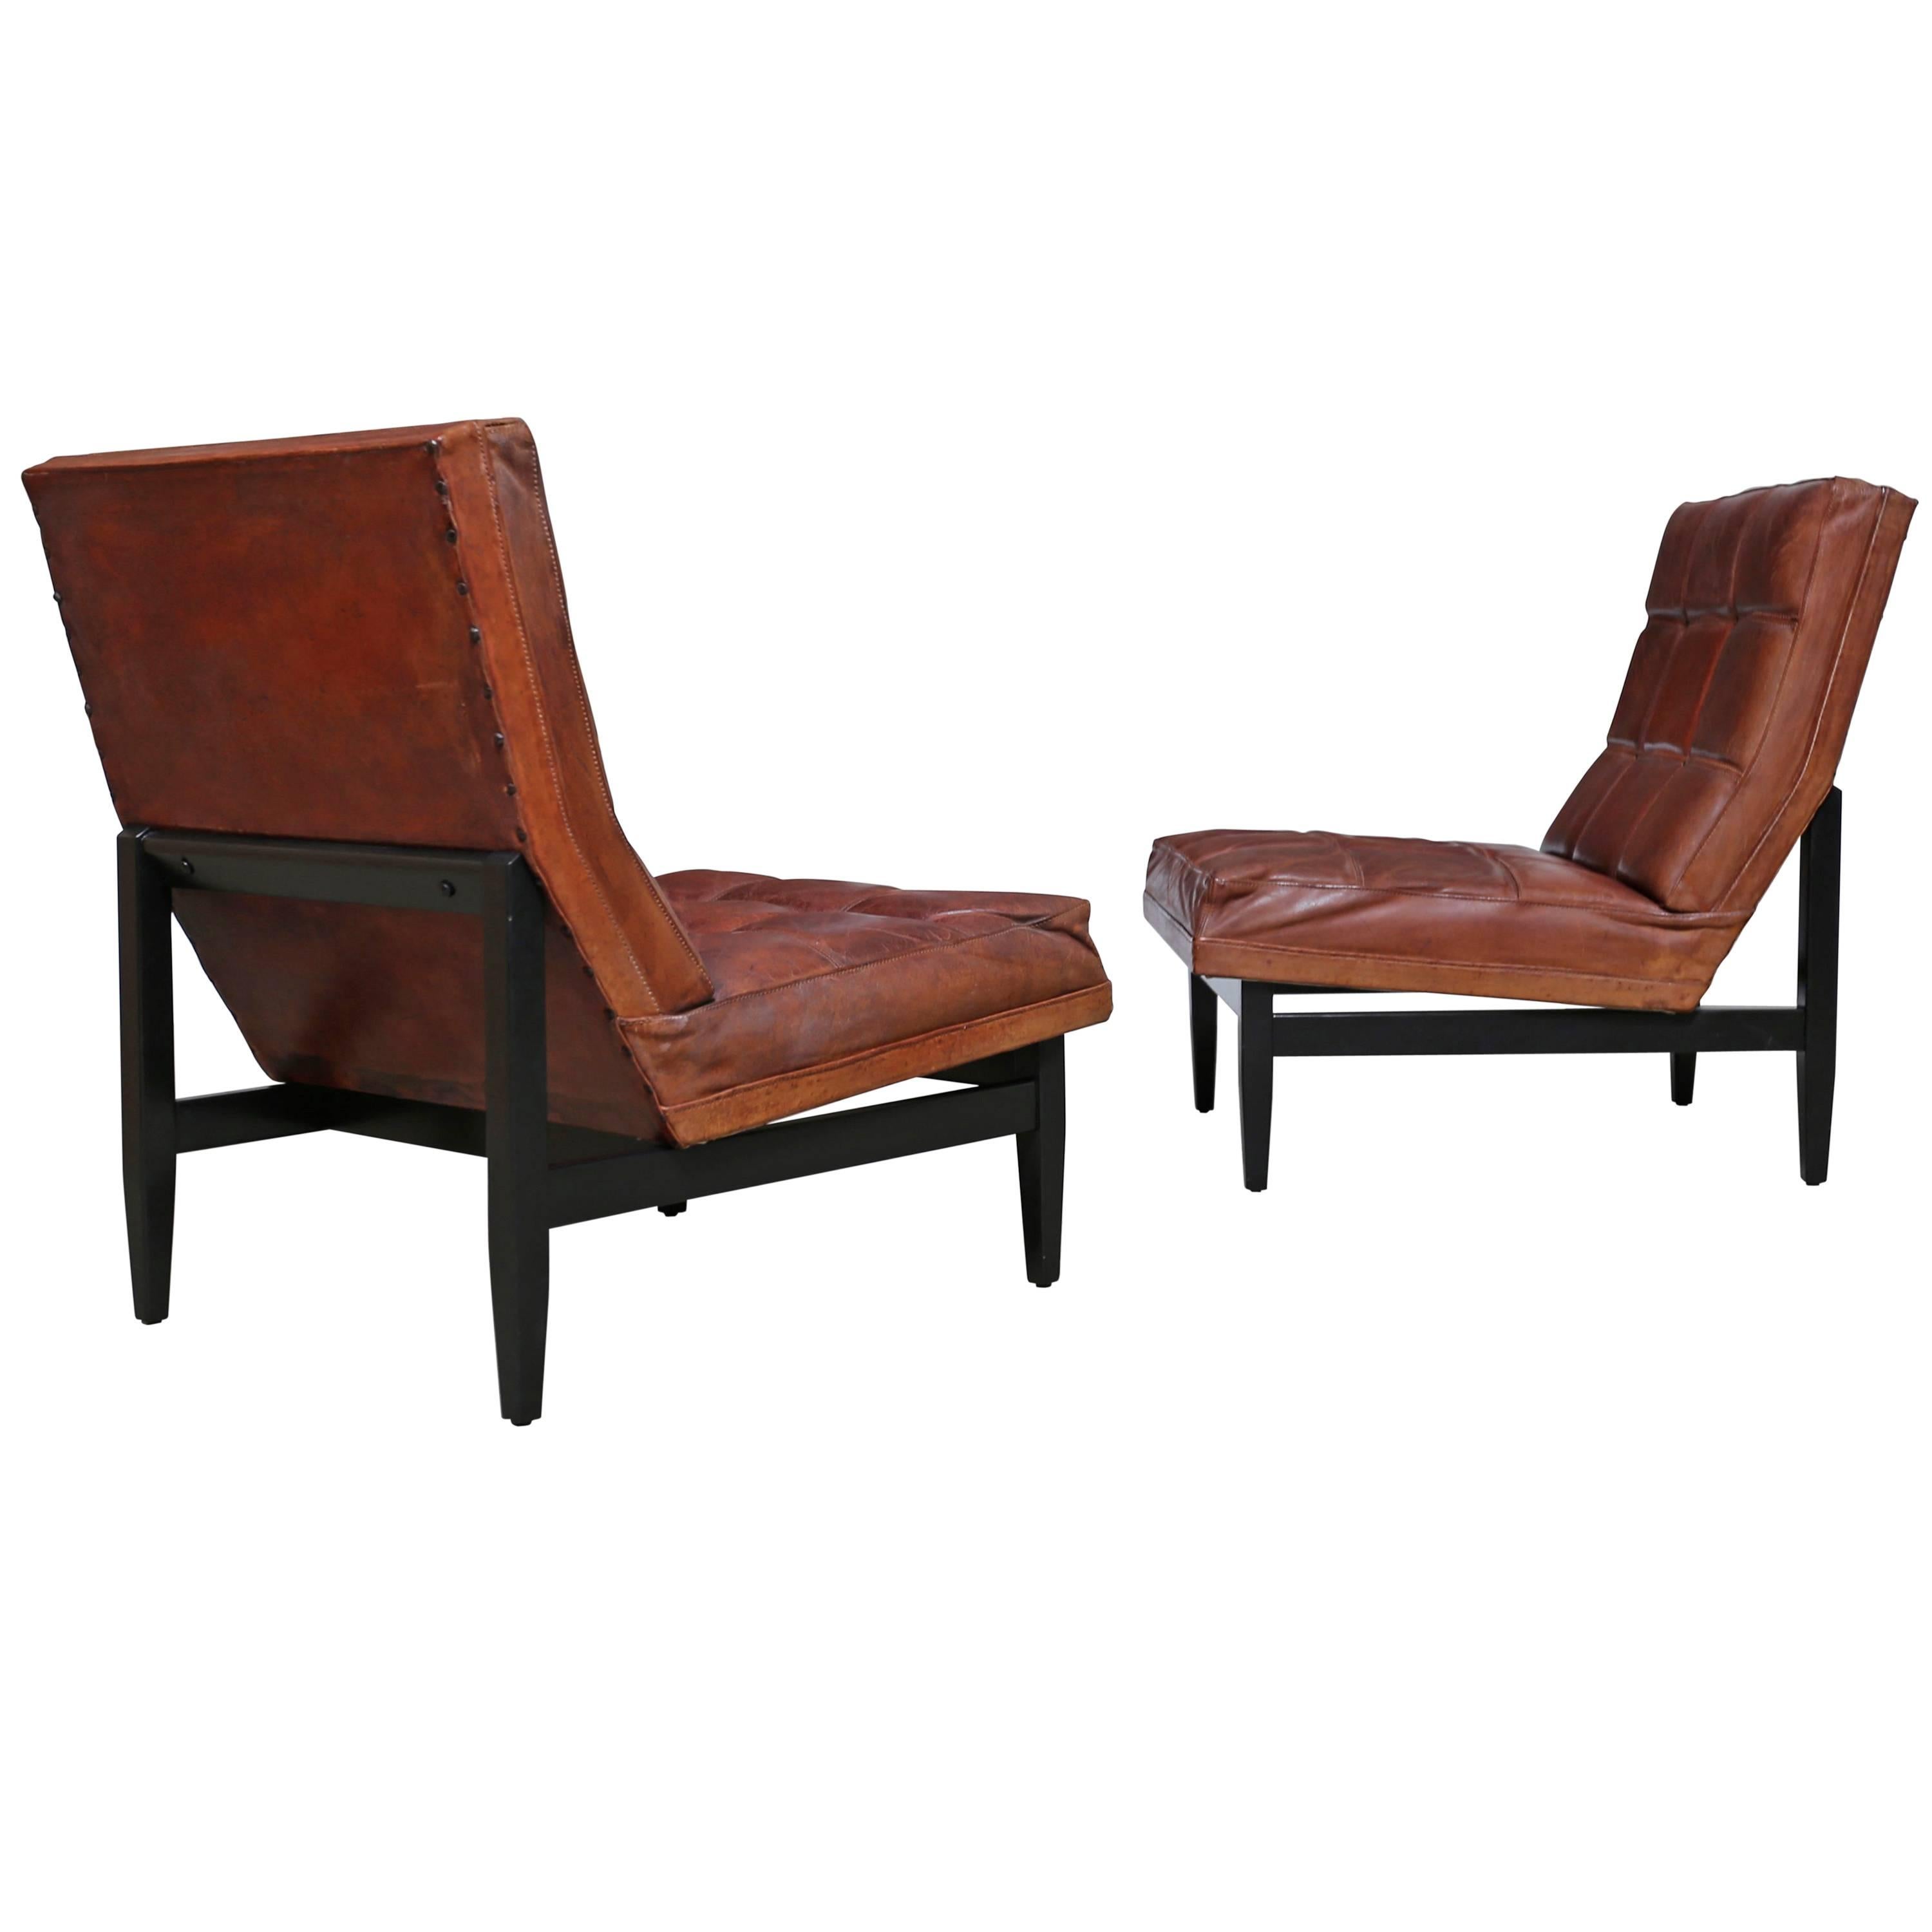 Pair of Leather Lounge Chairs by Camacho Roldan & Artecto Colombia